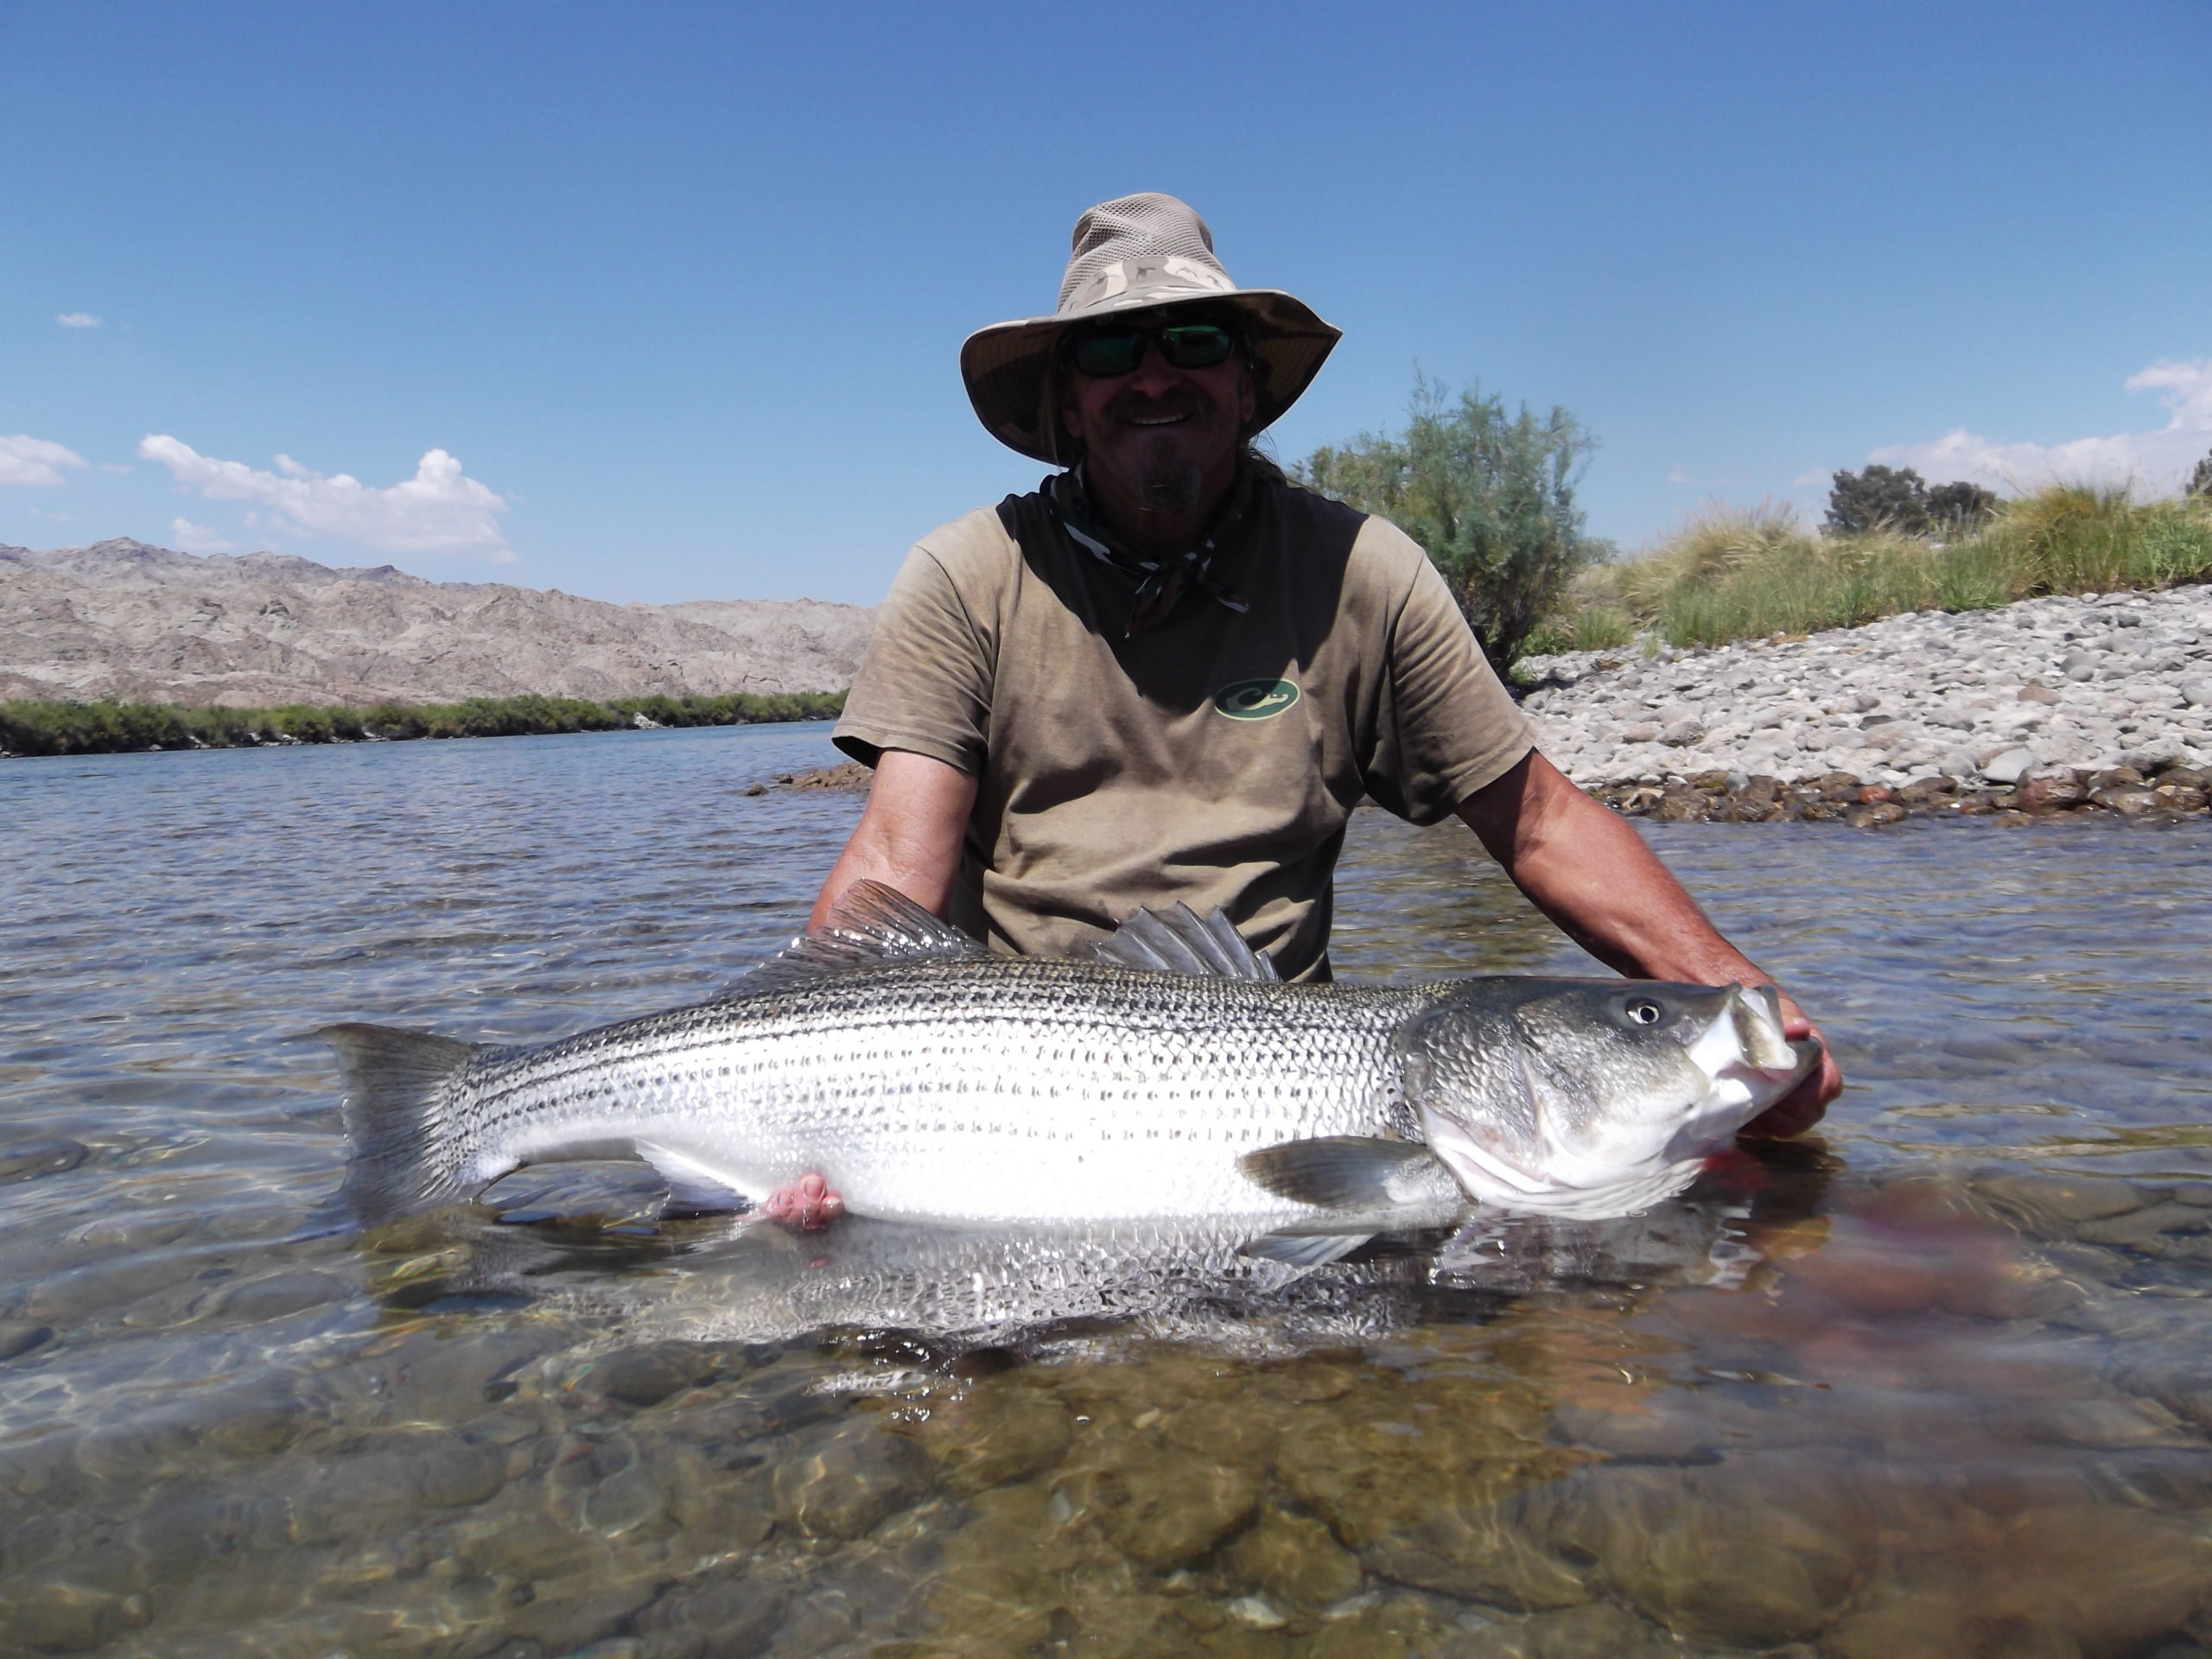 Fishing for Trout on the Colorado River